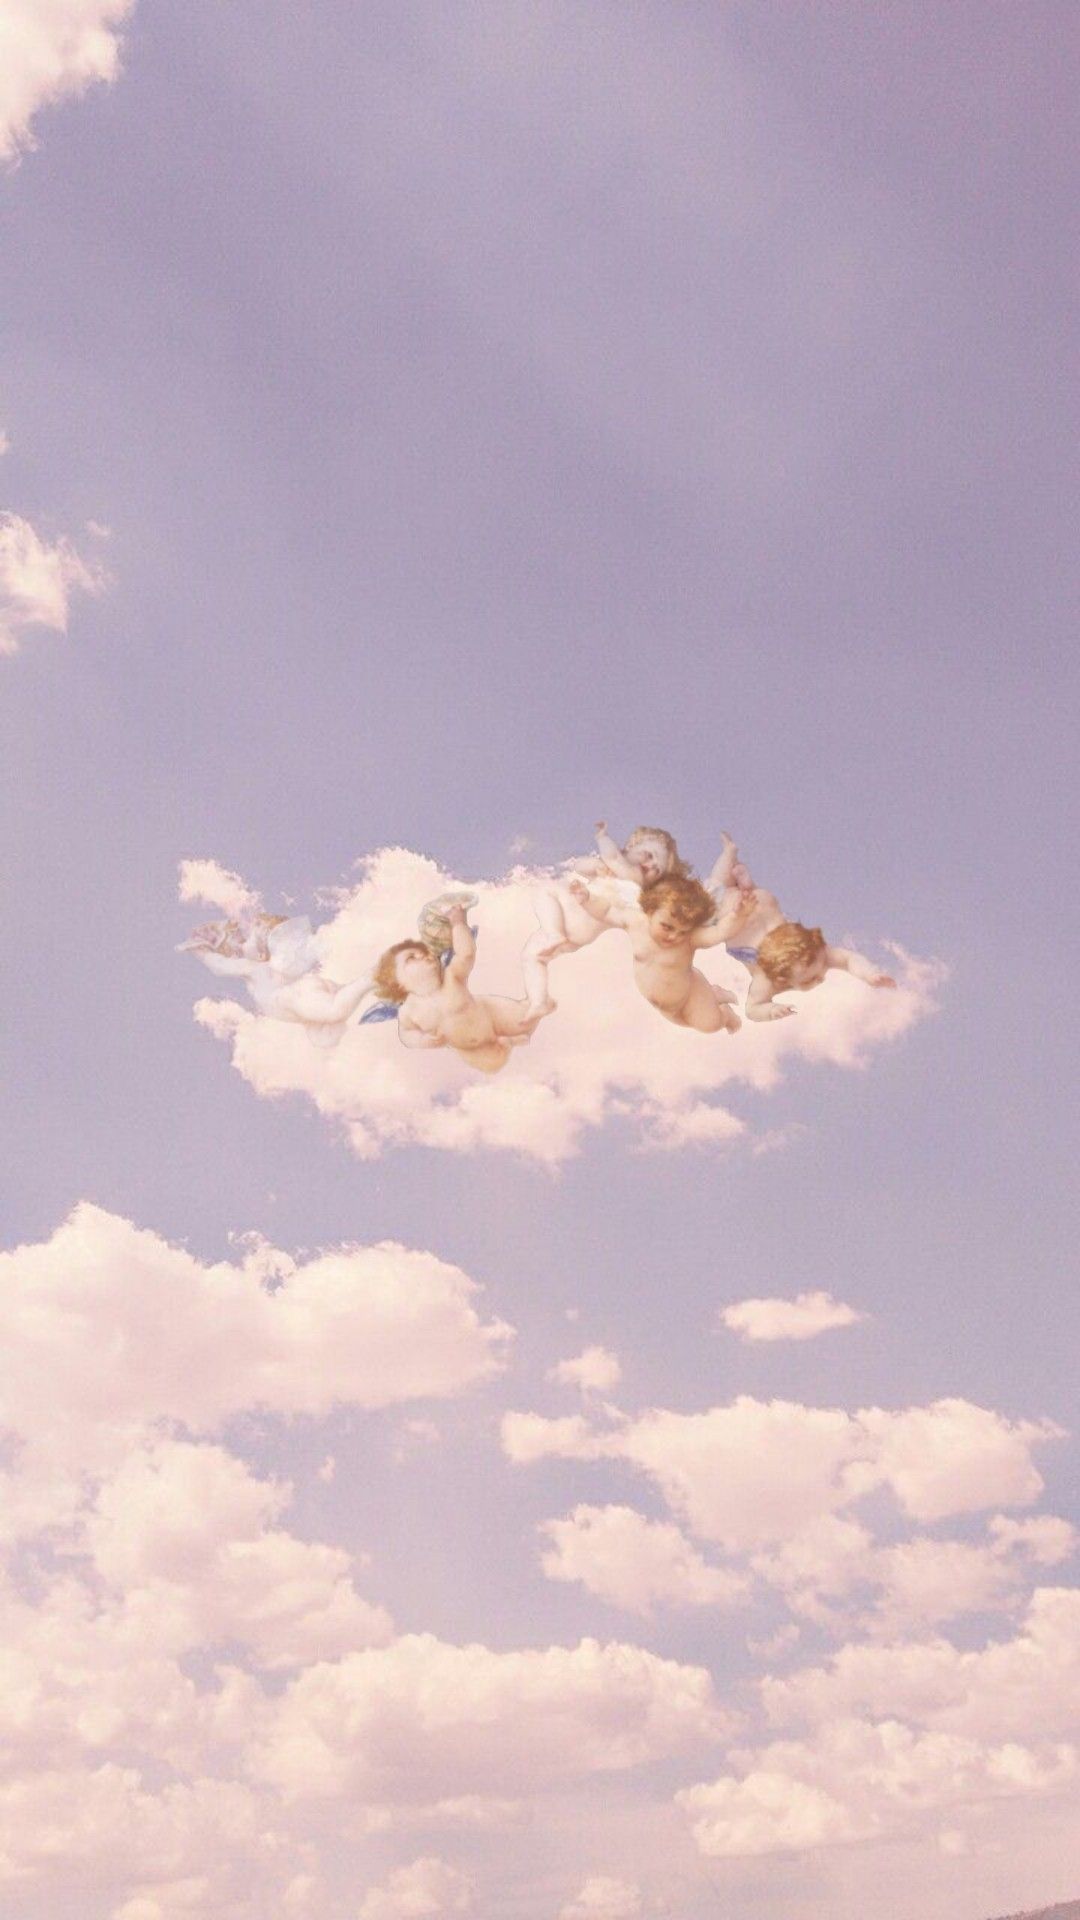 Angel Aesthetic Clouds Wallpaper Free Angel Aesthetic Clouds Background